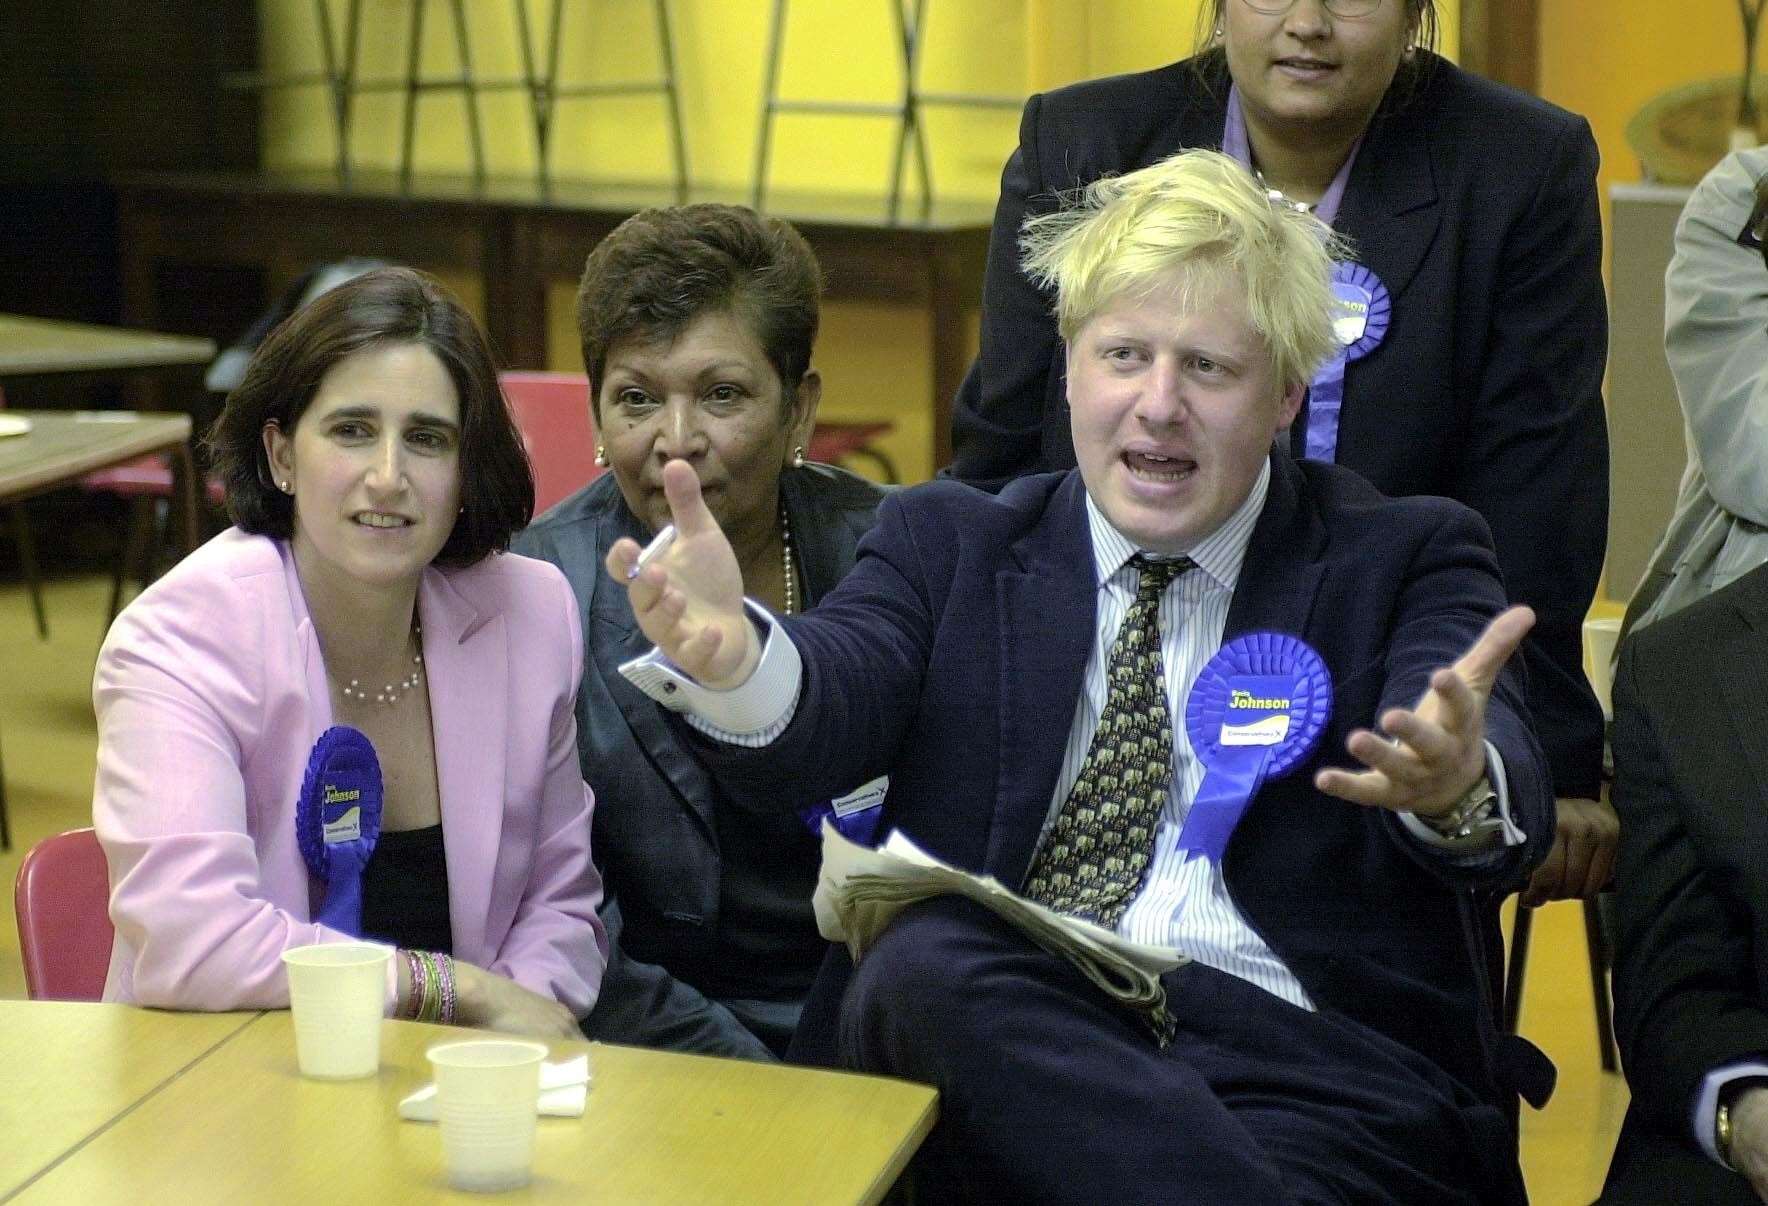 Boris Johnson watches the election results in 2001 with his then wife Marina Wheeler as he won the Henley seat for the Conservatives (PA)